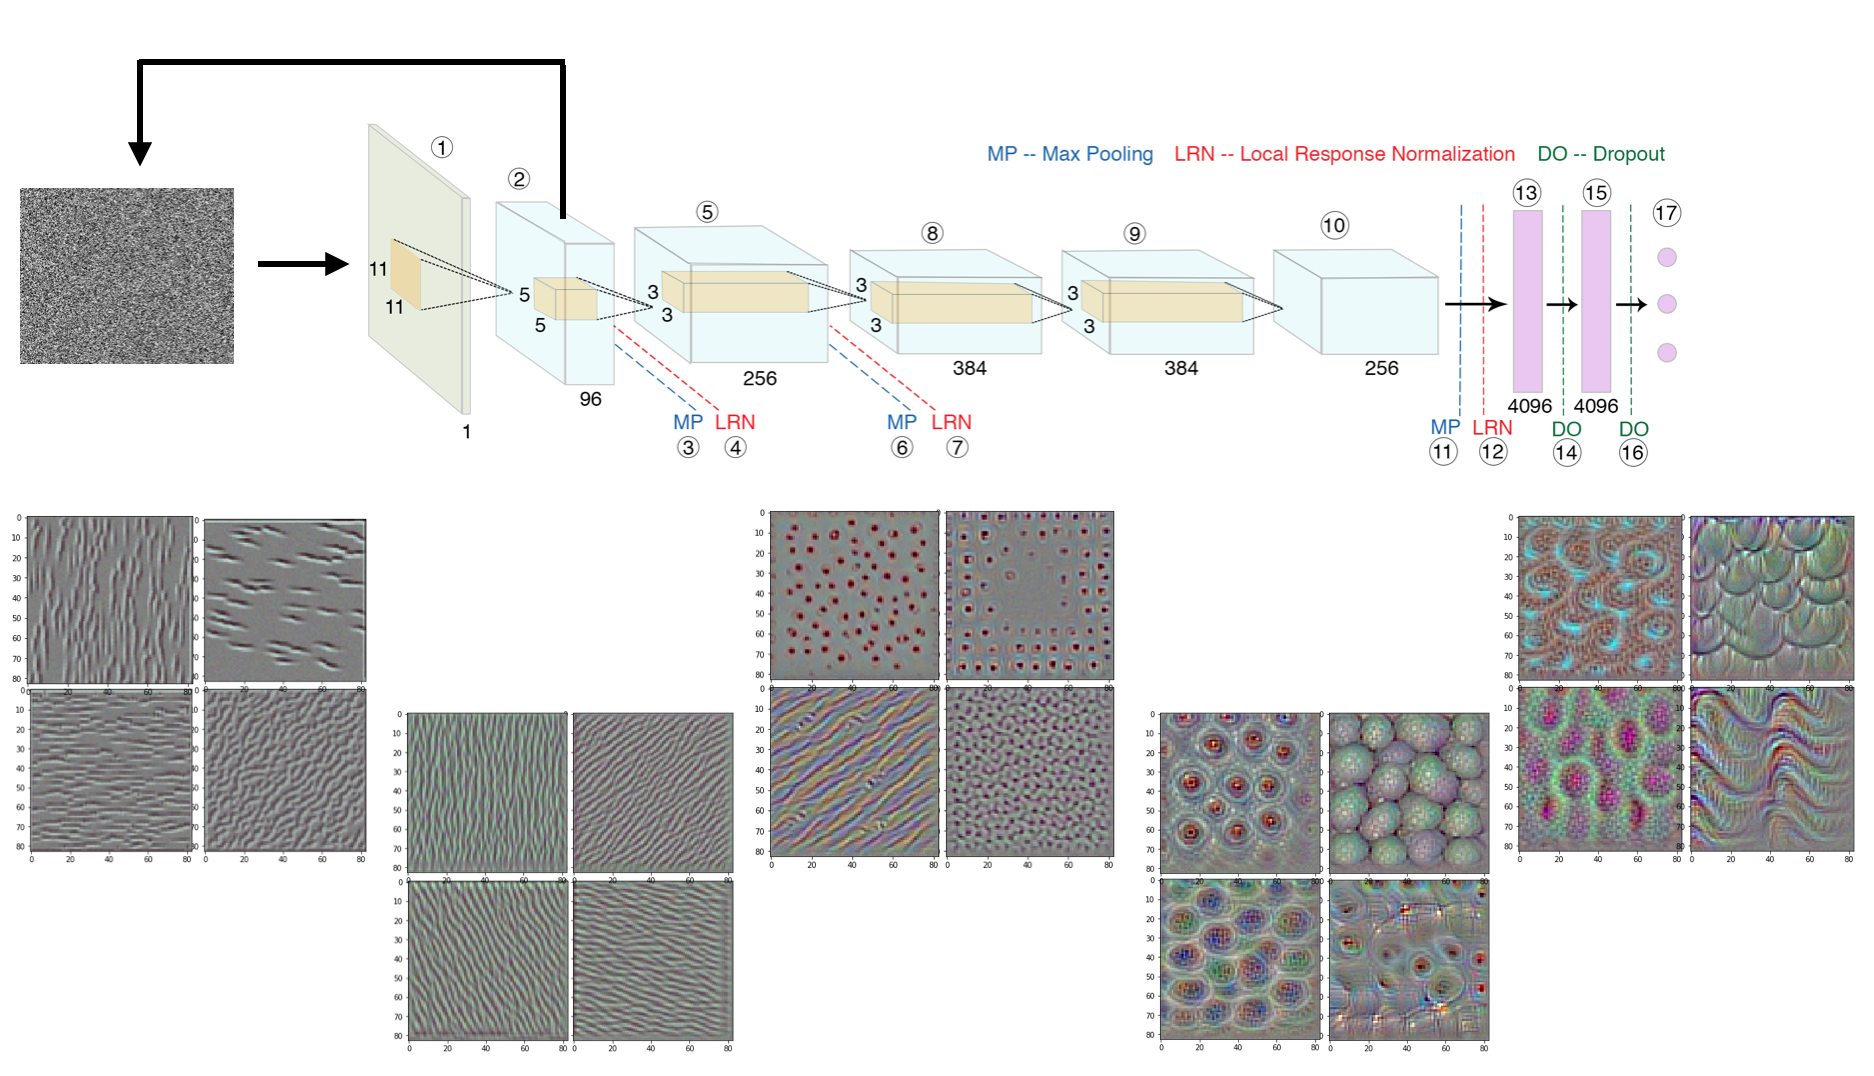 Visualizing the filter patterns from the 
									different layers of a trained GaMorNet framework.